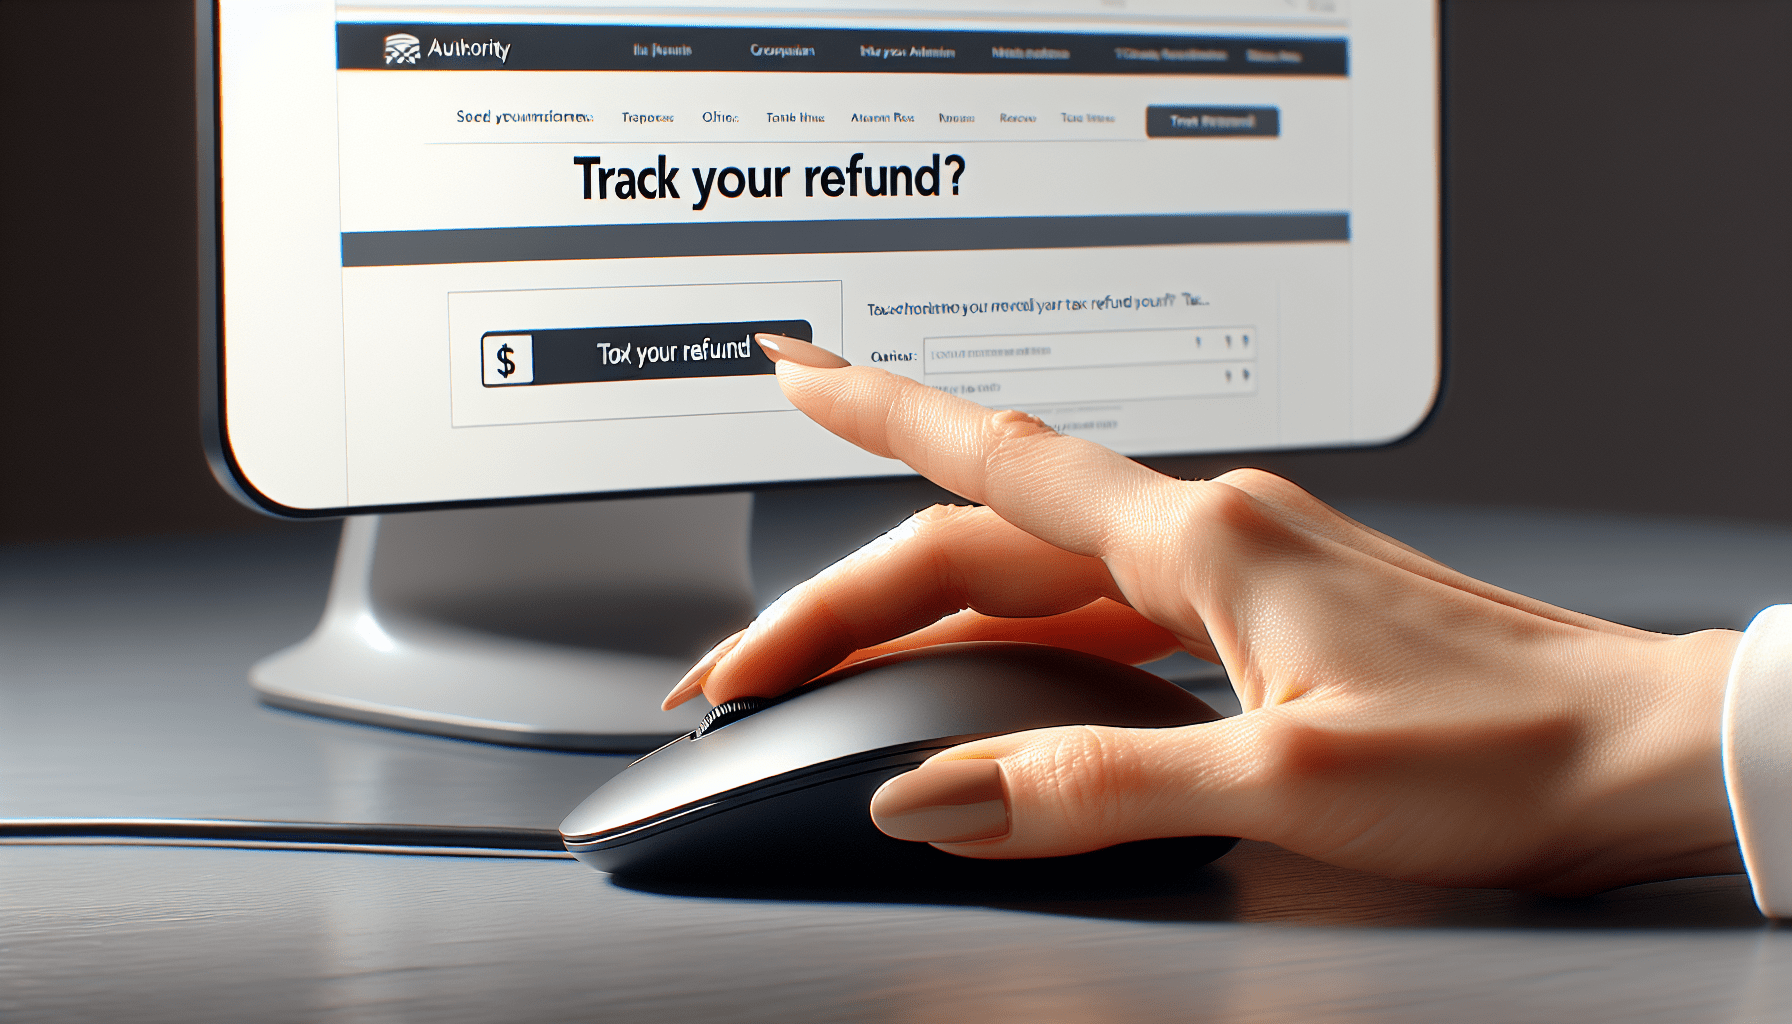 Can You Get Your Tax Refund Sooner Than 21 Days?